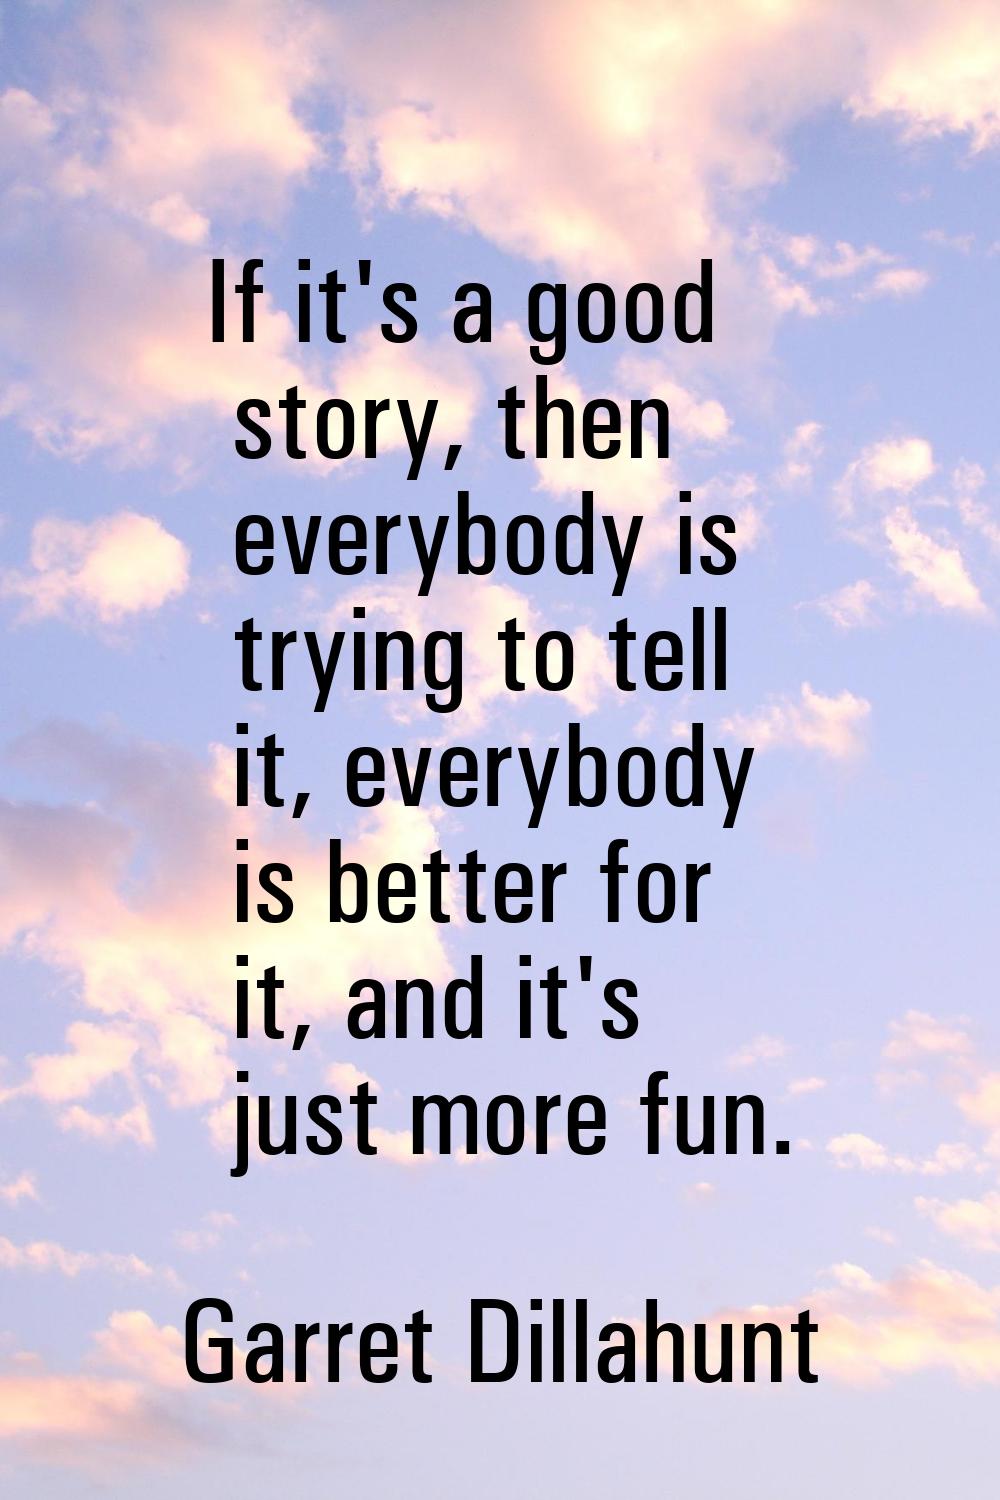 If it's a good story, then everybody is trying to tell it, everybody is better for it, and it's jus